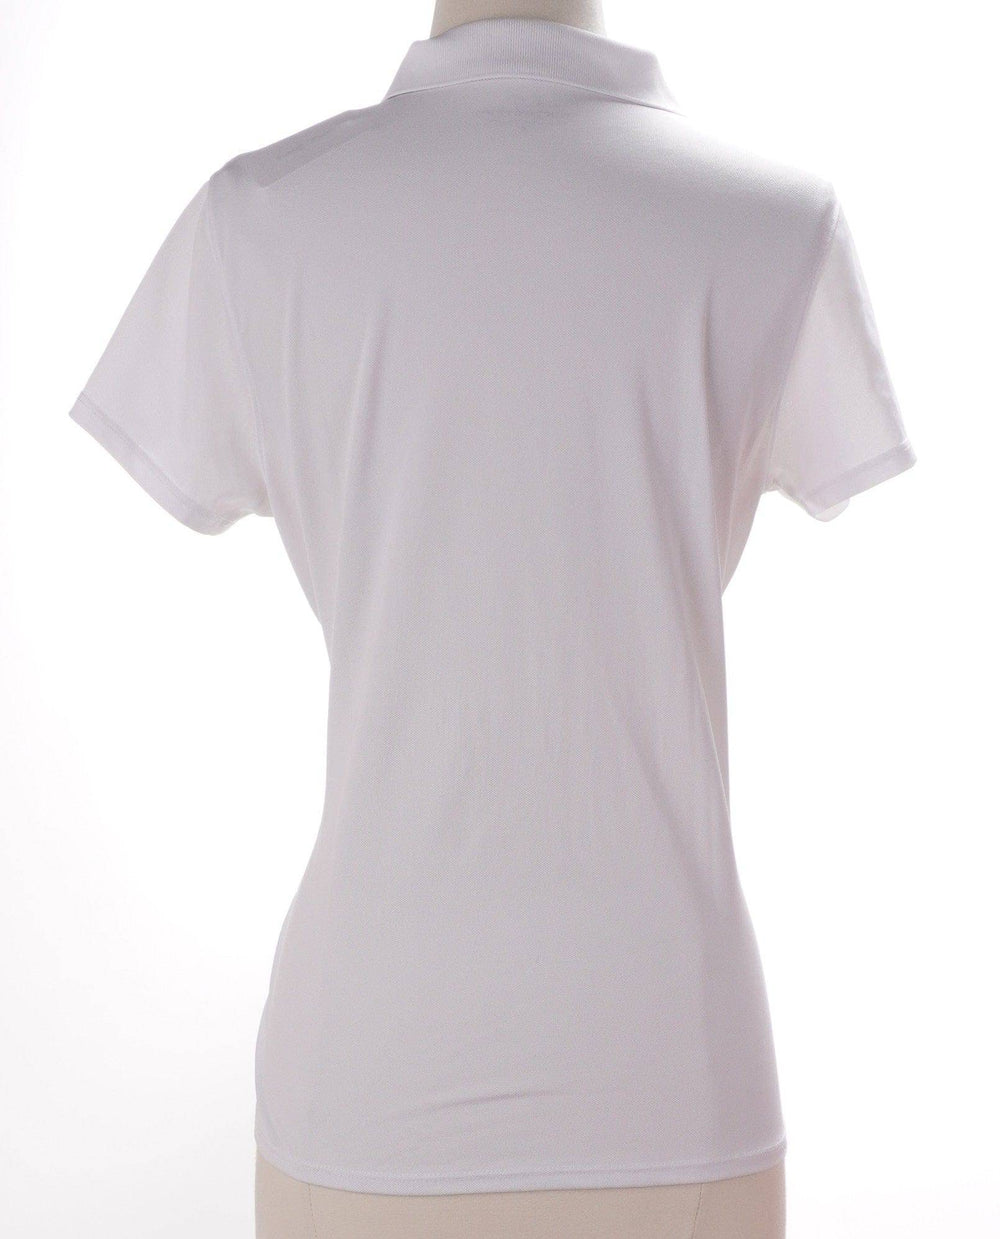 Vineyard Vines White / Small / Consigned Vineyard Vines Short Sleeve Top - White - Size Small